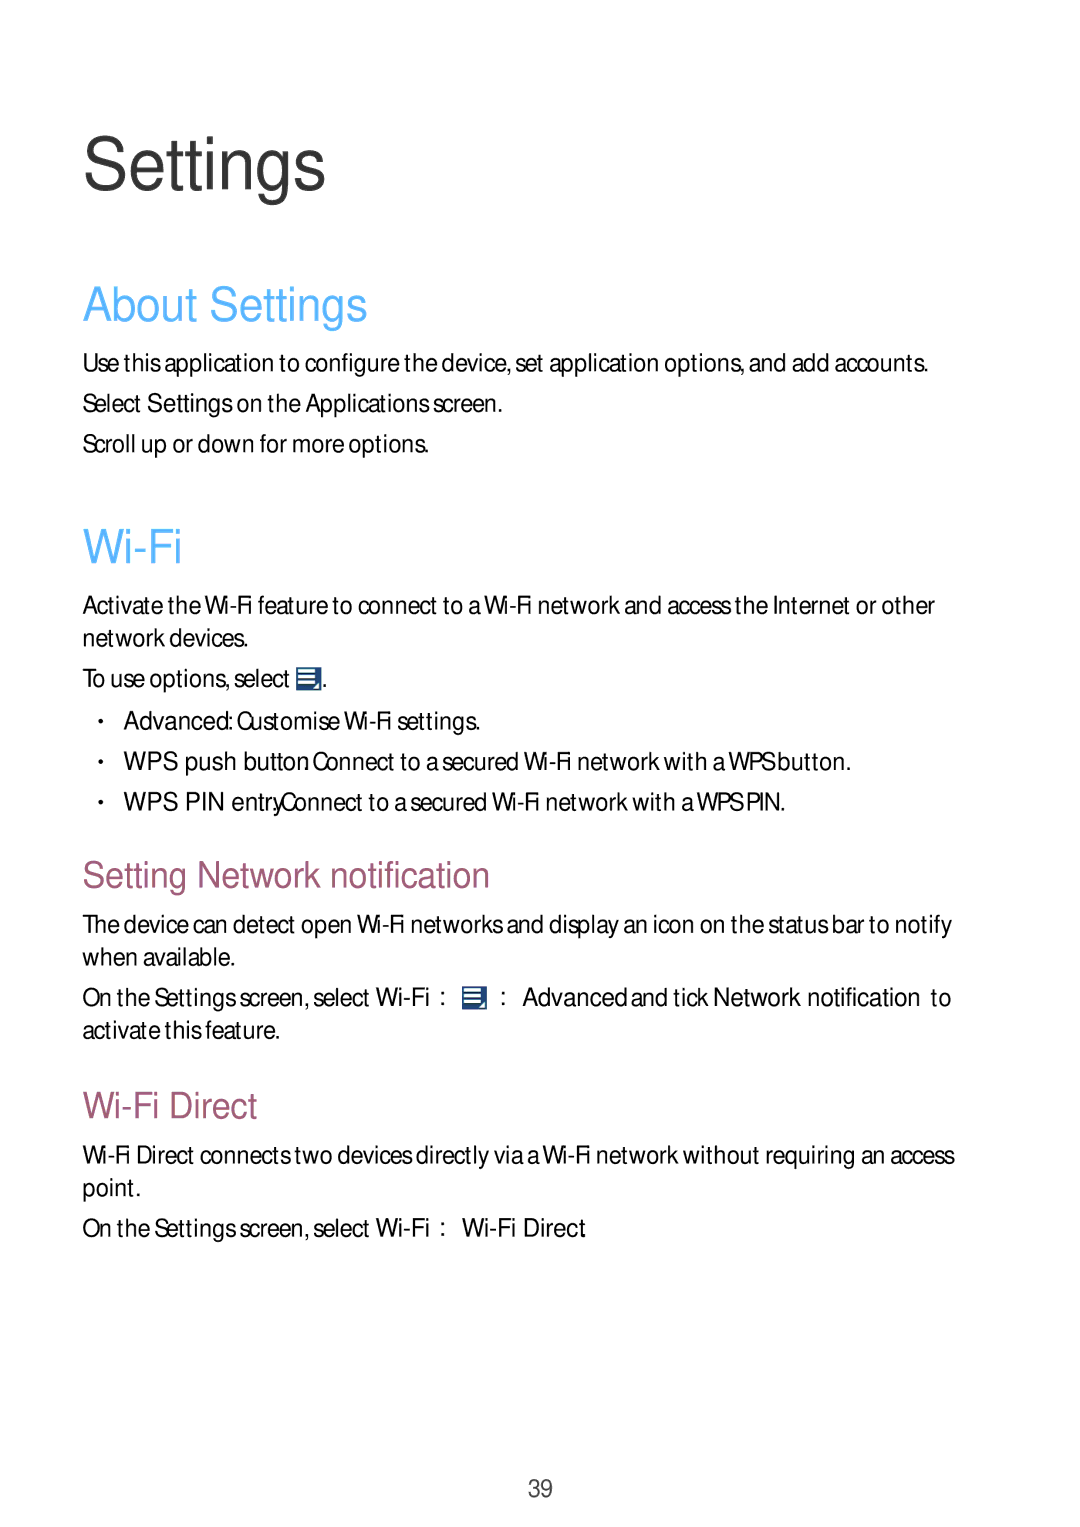 Samsung GT-B9150 user manual About Settings, Setting Network notification, Wi-Fi Direct 